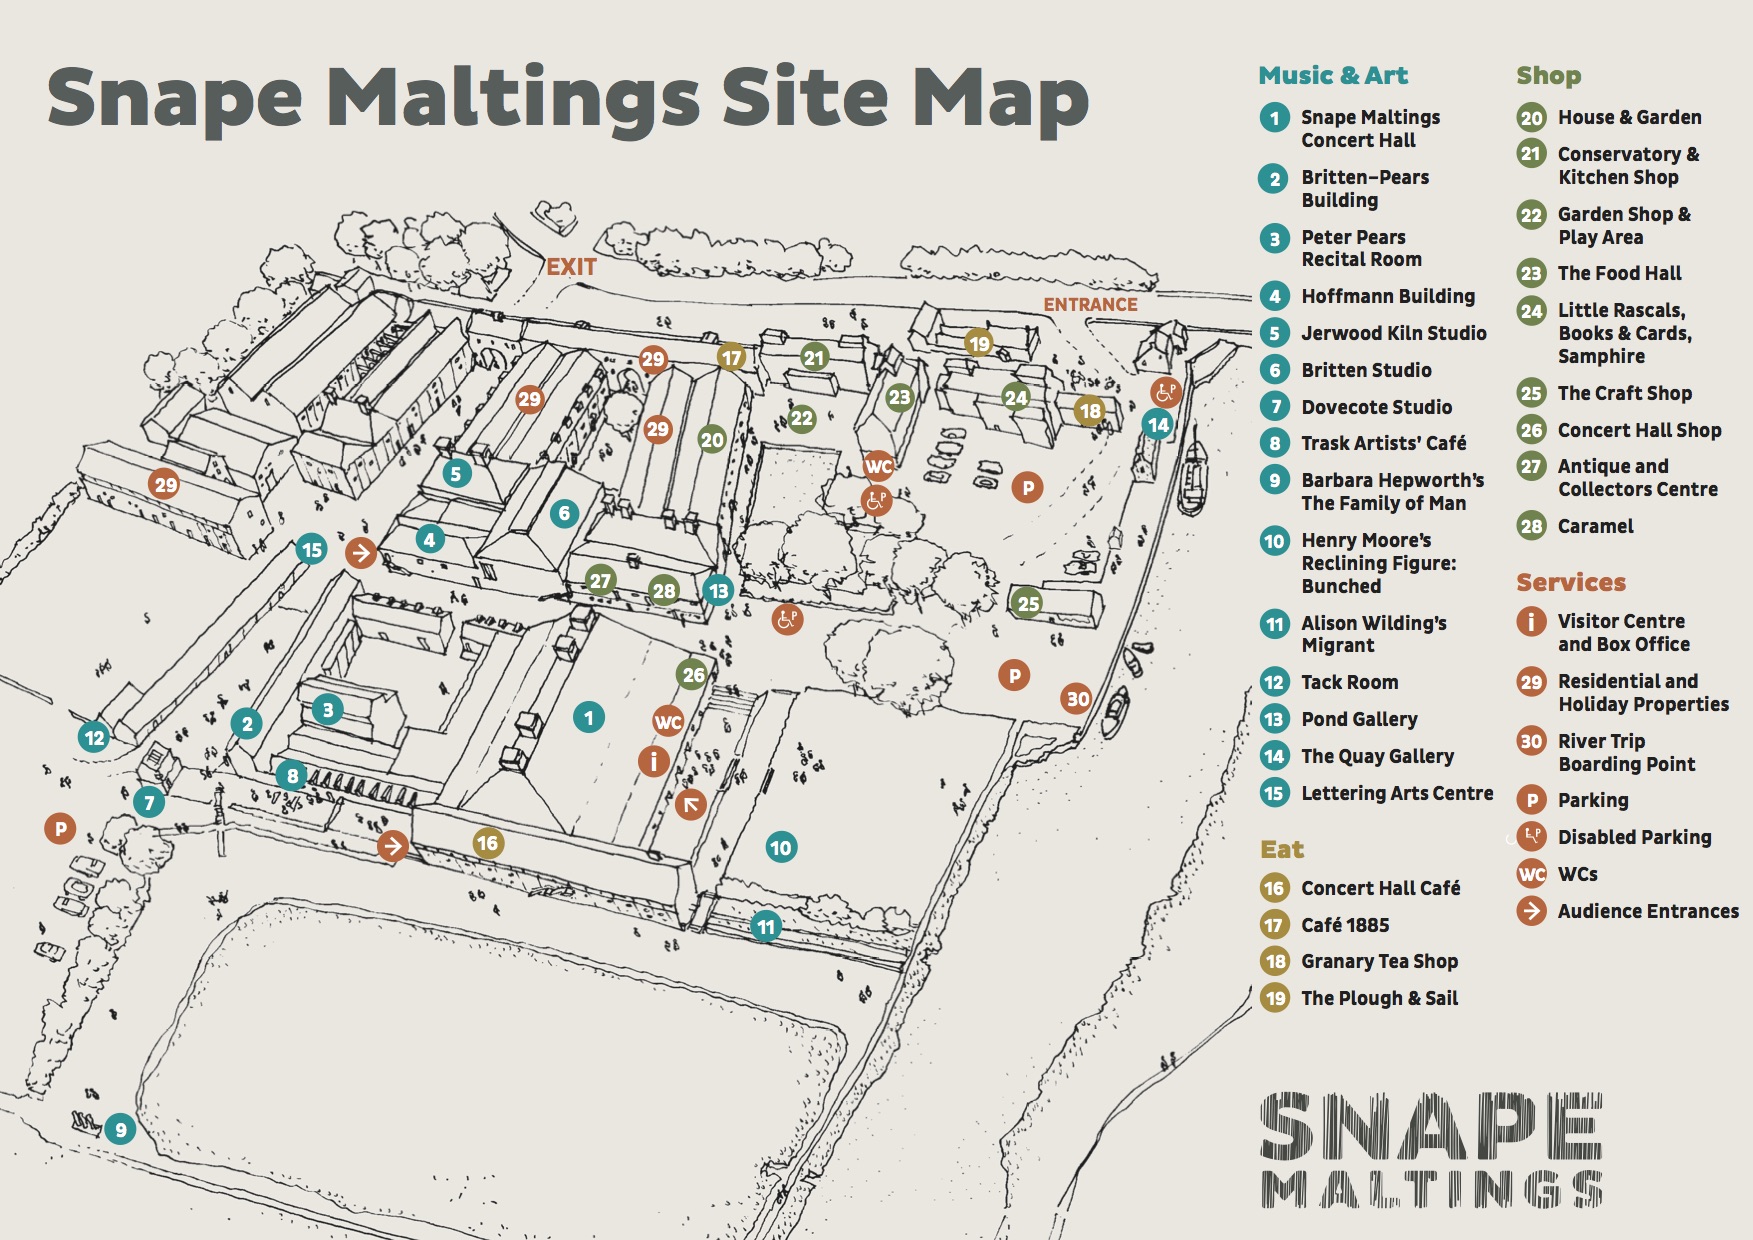 Snape Maltings site map, with numbers matching some of the locations list